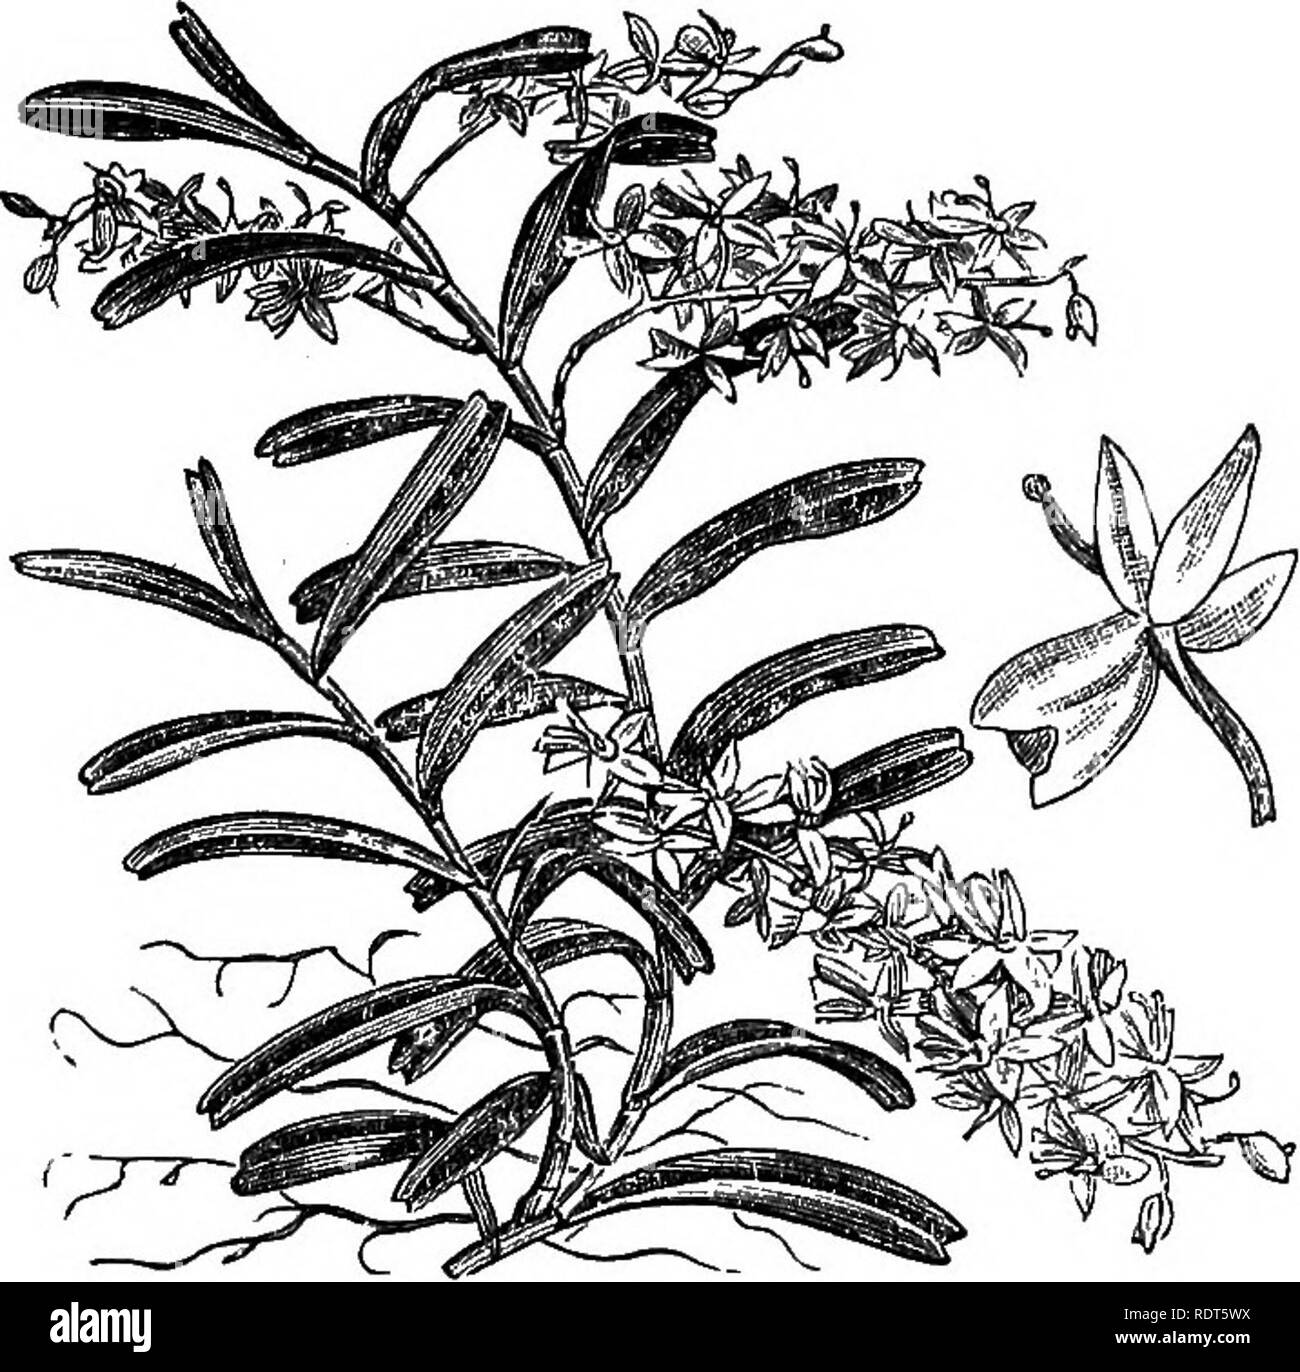 . The orchid-grower's manual, containing descriptions of the best species and varieties of orchidaceous plants in cultivation ... Orchids. CATASETUM; 14Â£ C. PURPUREA, Lindley.âA beautiful upright-growing plant,with distichous oblong-linear emarginate leaves three or four inches long. It produces its flower spikes, which are about eight inches long and many-flowered, from the side of the stem; the blossoms arc pale rose-coloured, the lip being of a deeper rosy crimson, and they appear from March to May, lasting two or three weeks in beauty. A fine specimen of this species was shown at Chiswick Stock Photo